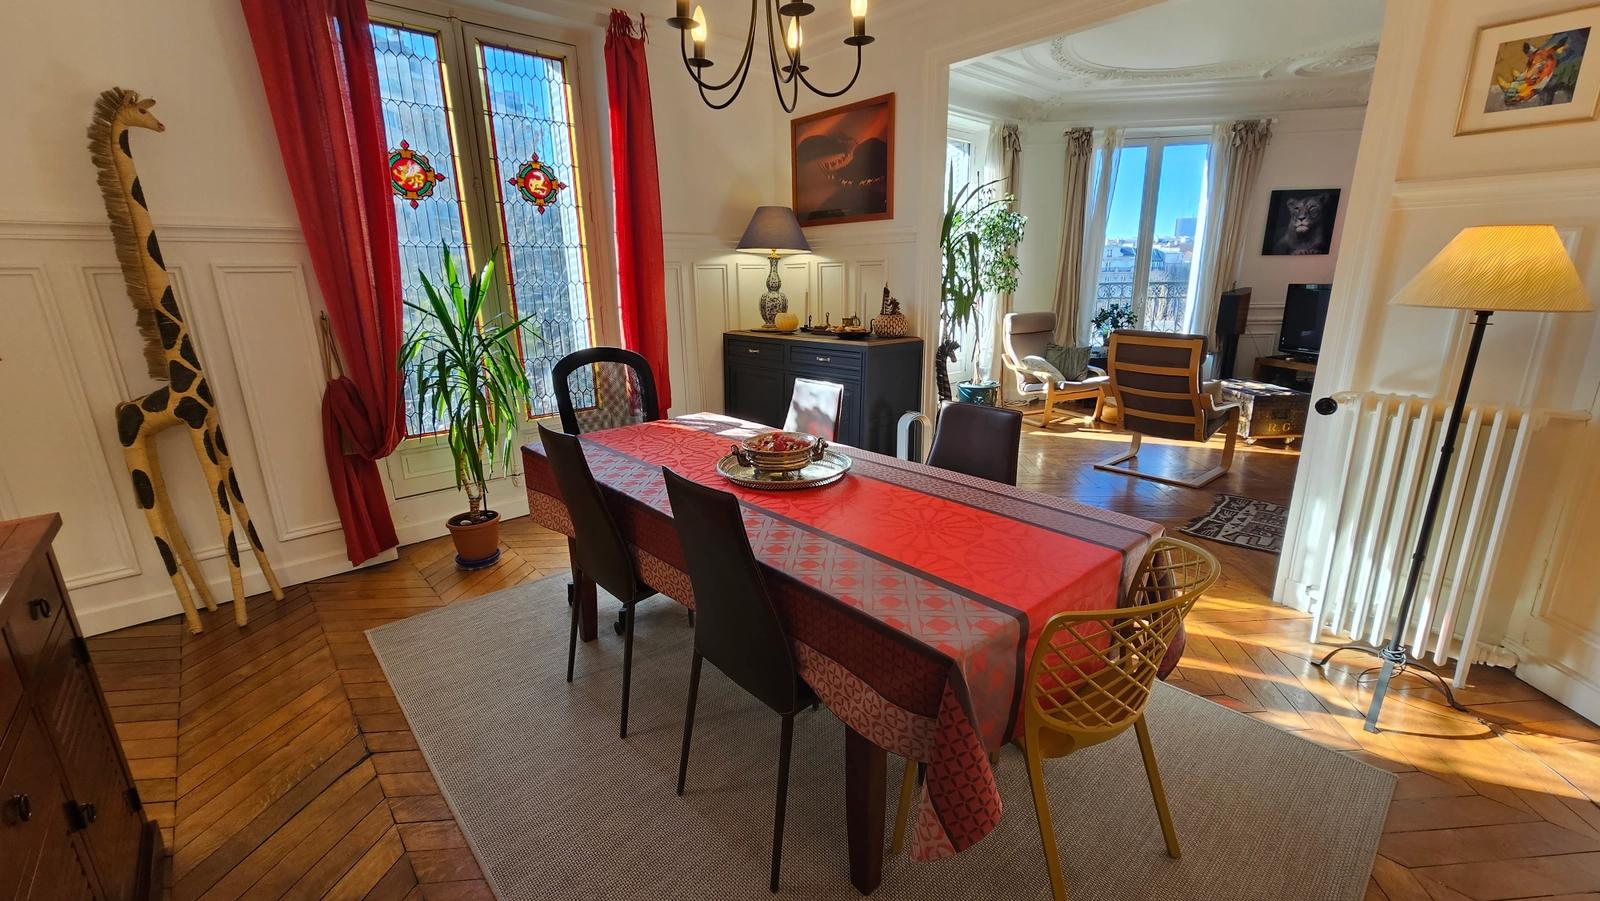 Meeting room in Haussmannian apartment with exotic decor - 3